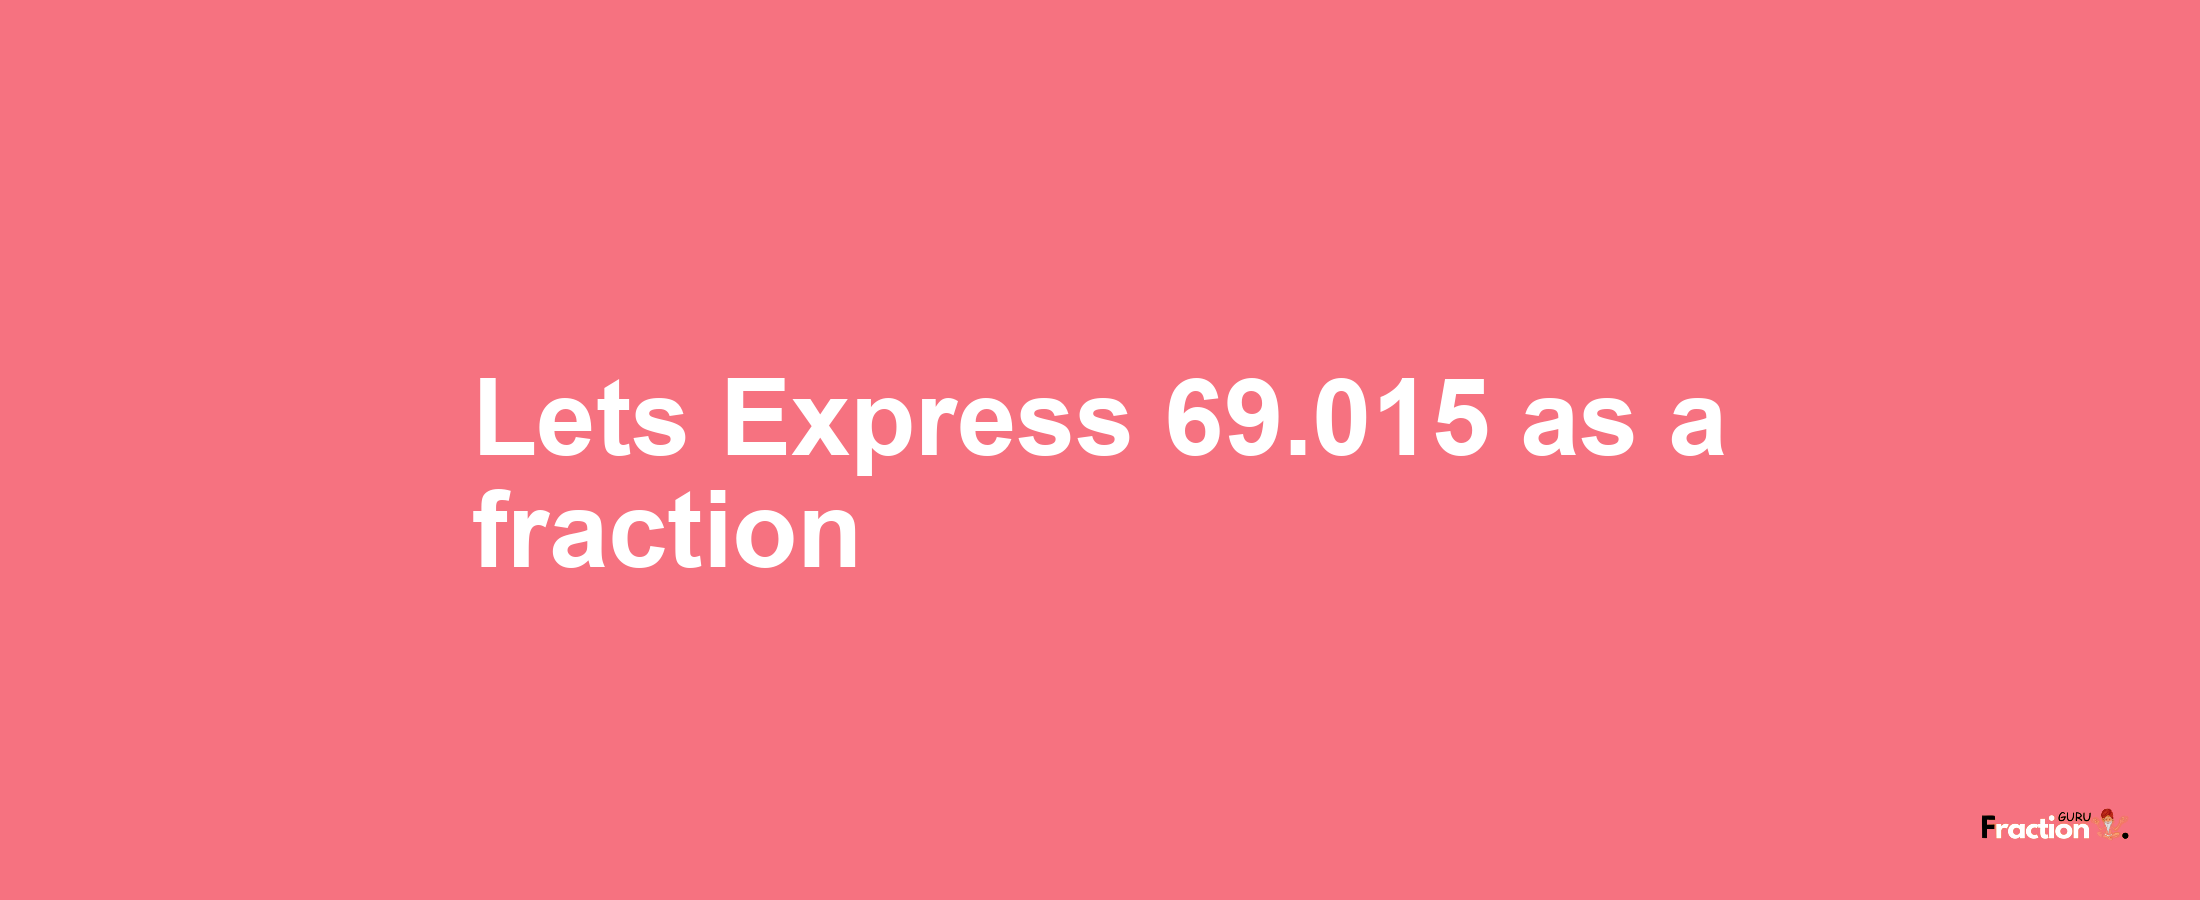 Lets Express 69.015 as afraction